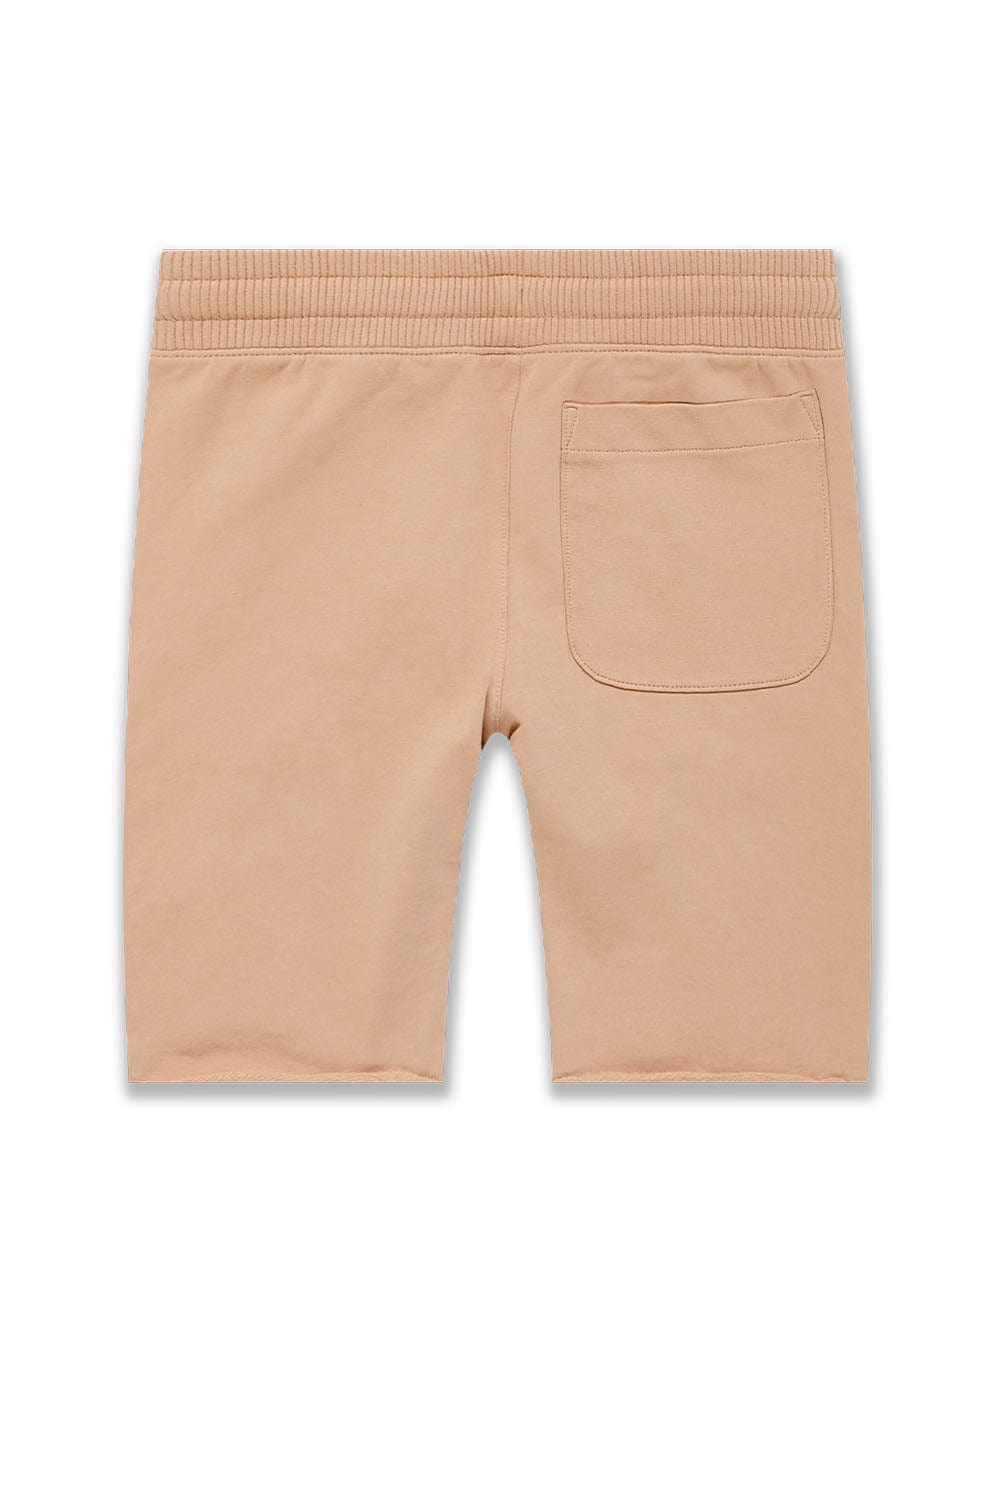 JC Kids Kids Palma French Terry Shorts (Exclusive) (Memorial Day Markdown)